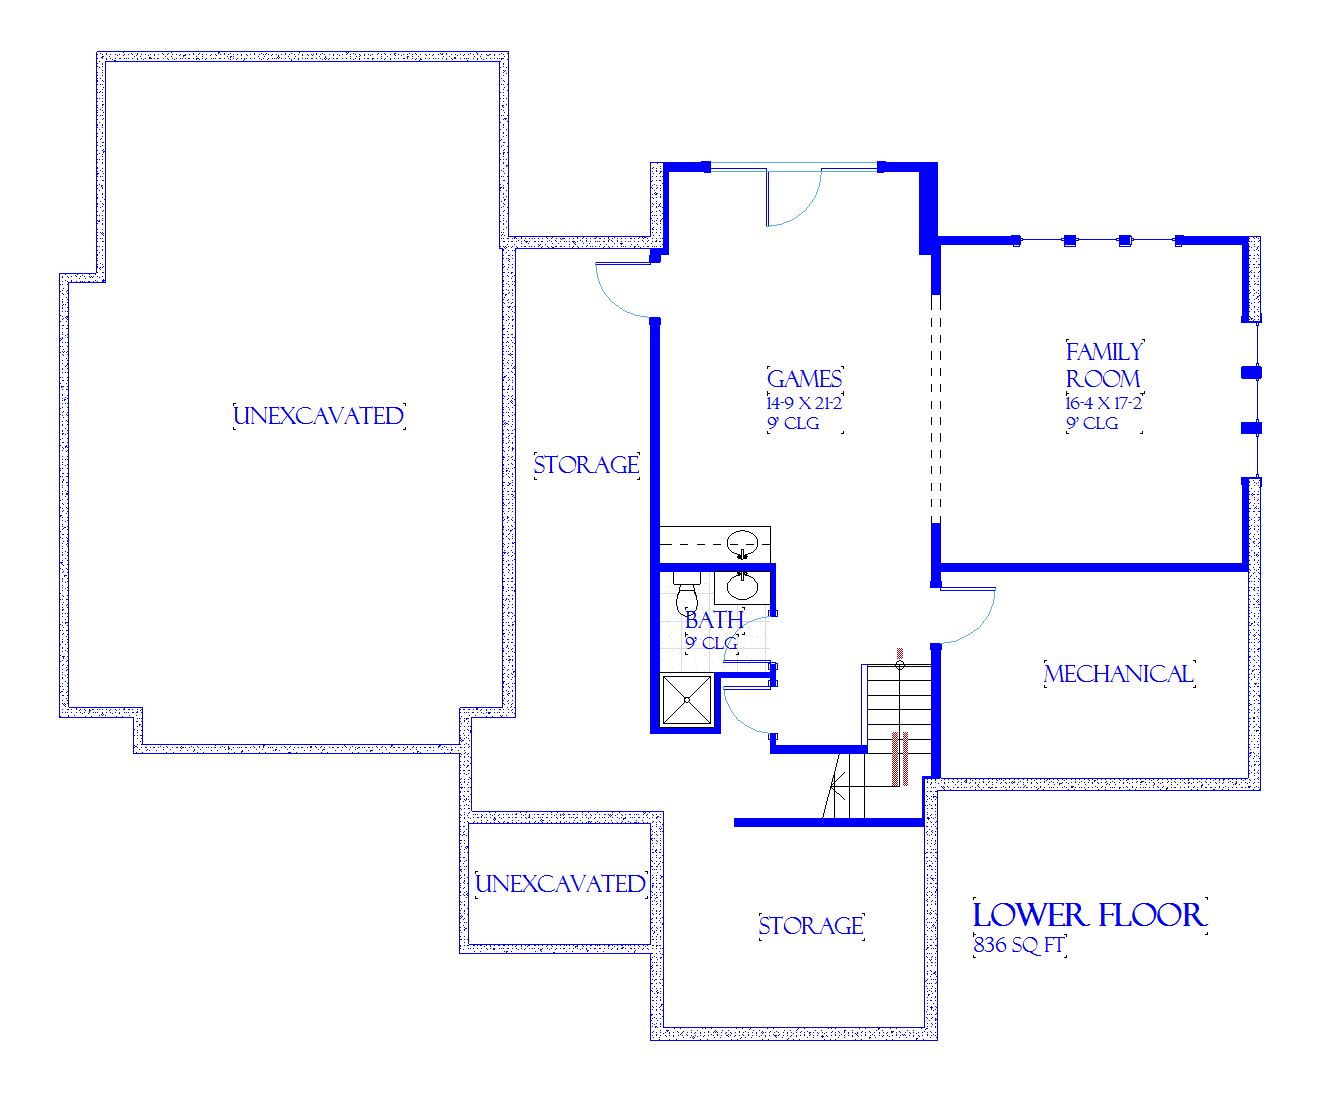 Cambridge - Home Design and Floor Plan - SketchPad House Plans